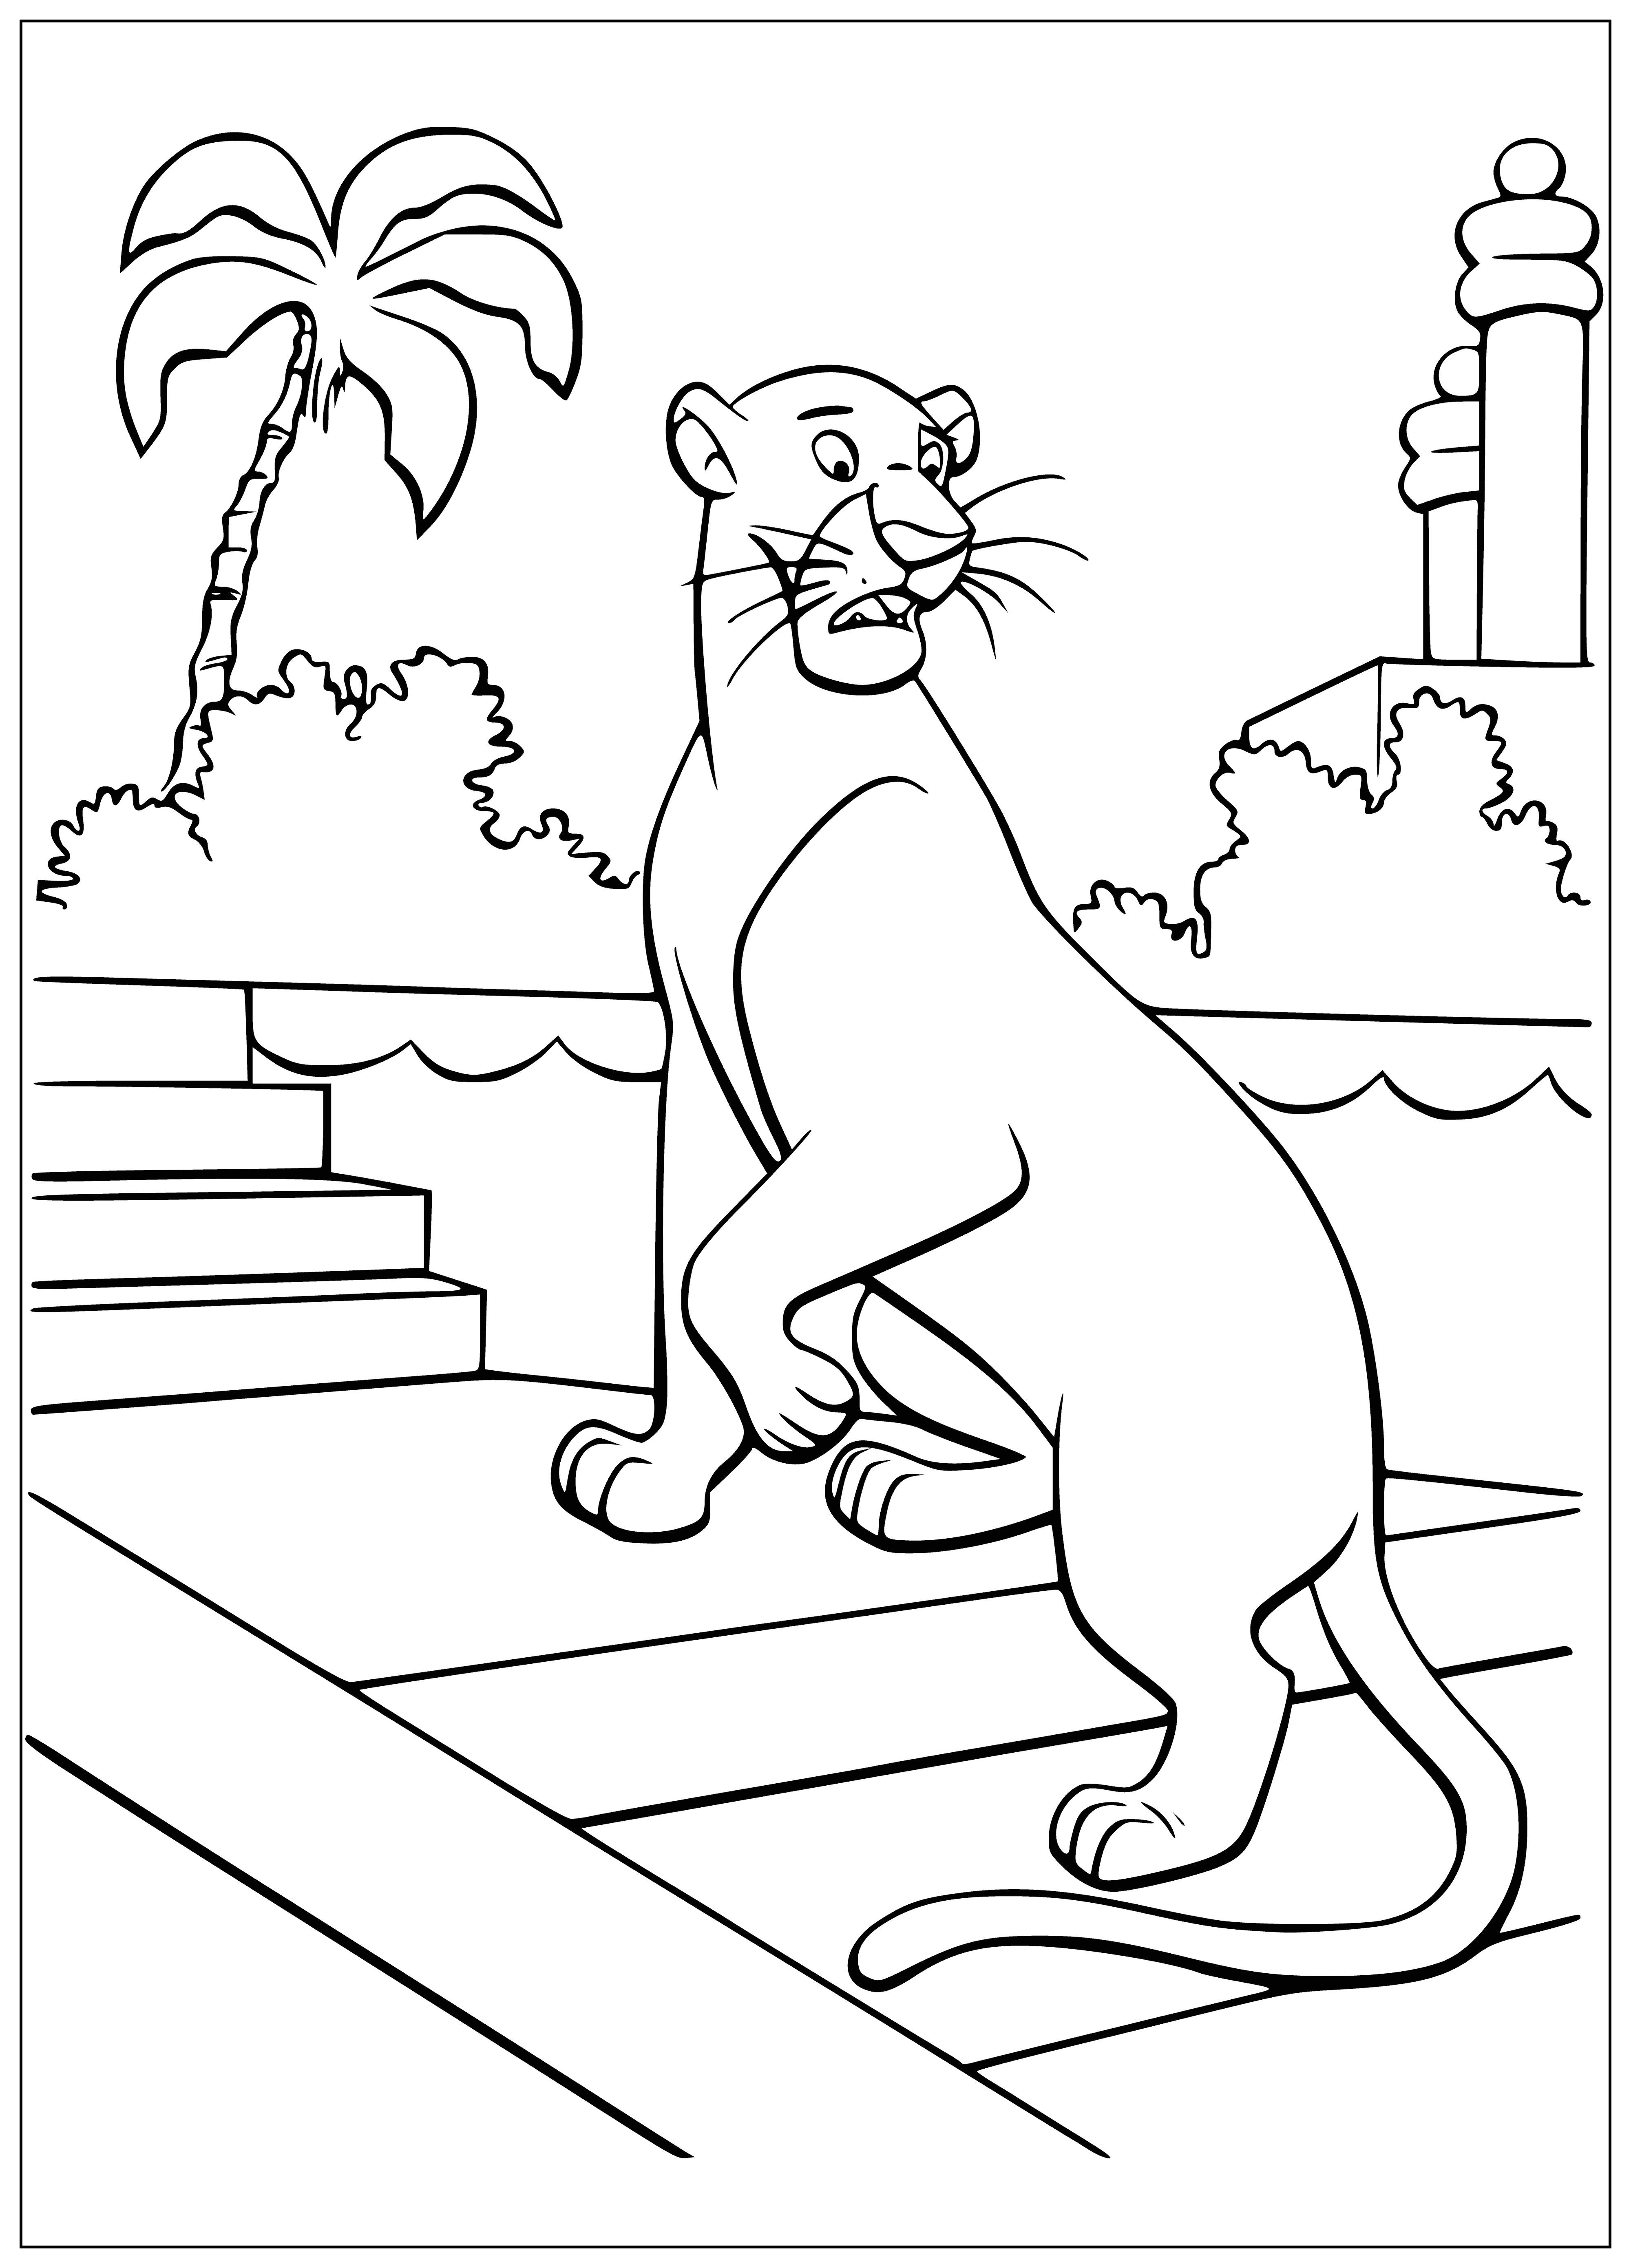 coloring page: A sleek panther stalks through the jungle, eyes fixed, rippling muscles ready to pounce.